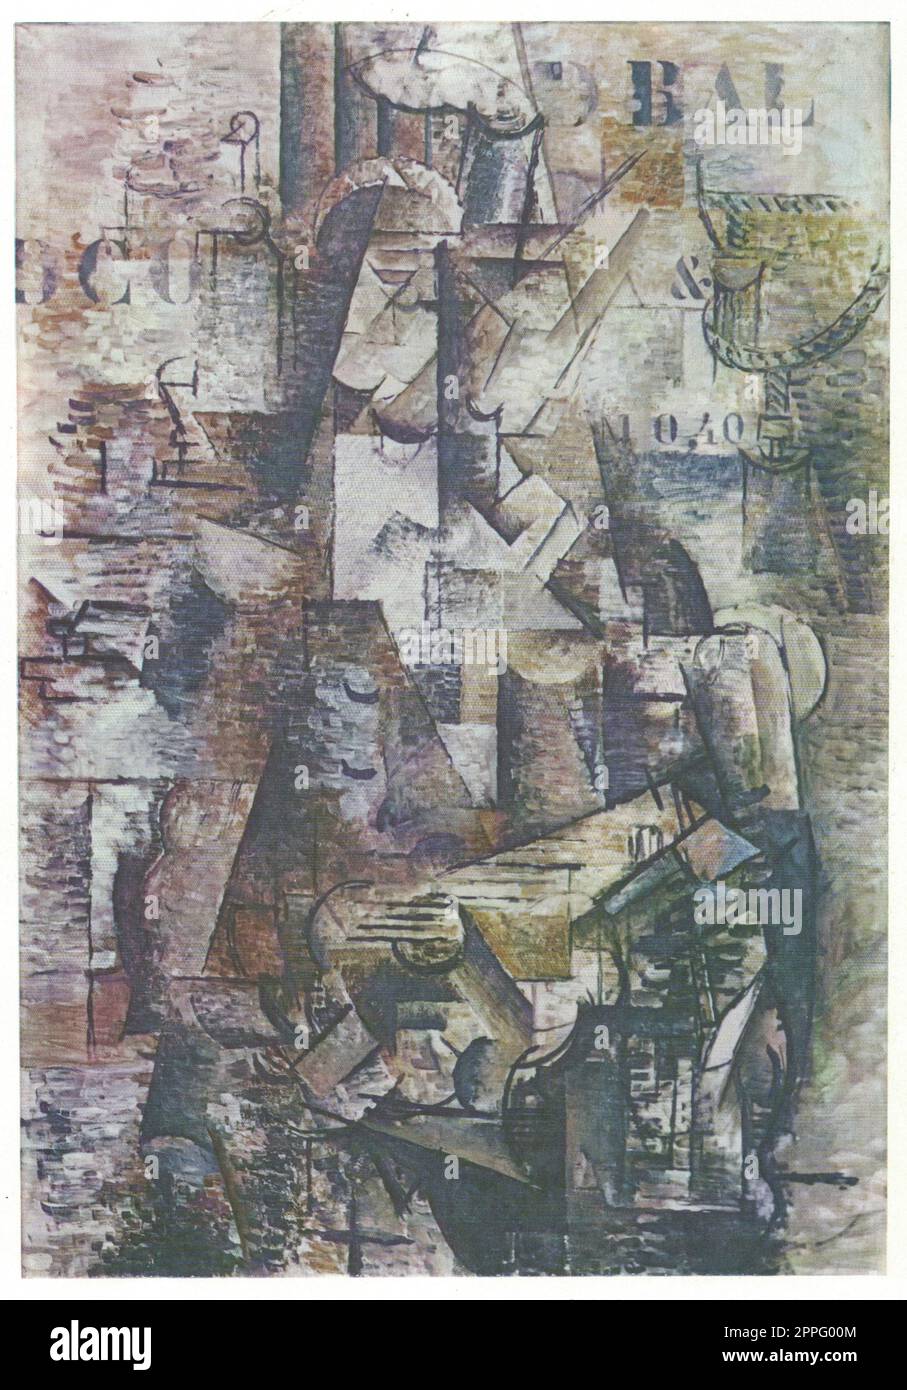 Georges Braque, The Portuguese, 1911, oil on canvas. Georges Braque, 13 May 1882 - 31 August 1963, was a major 20th-century French painter, collagist, draughtsman, printmaker and sculptor. His most notable contributions were in his alliance with Fauvism f Stock Photo